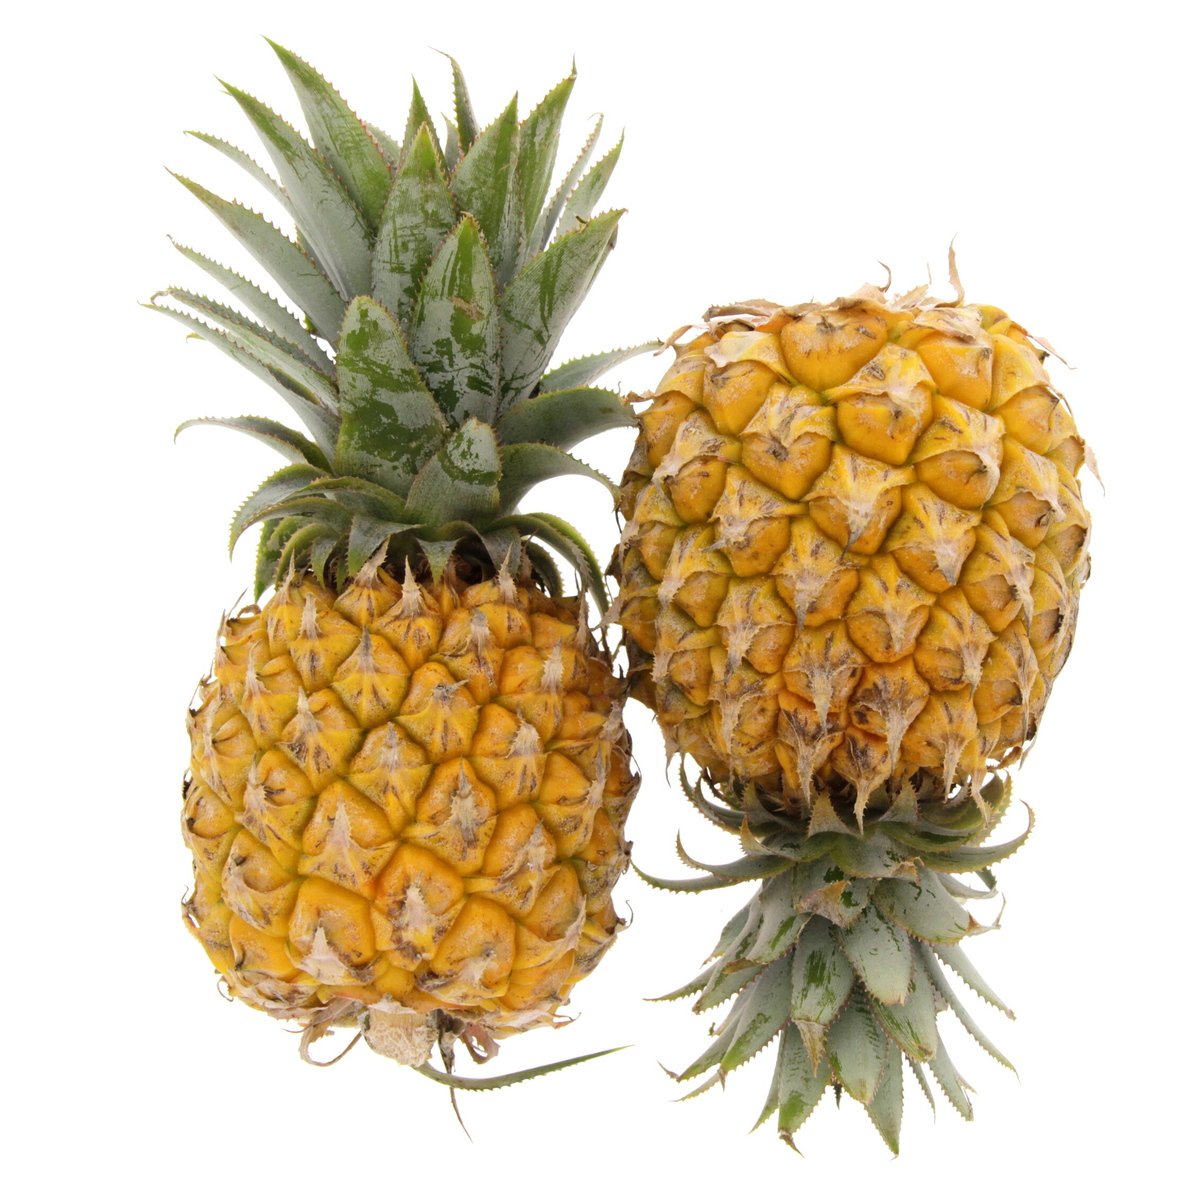 Baby Pineapple South Africa 1pc